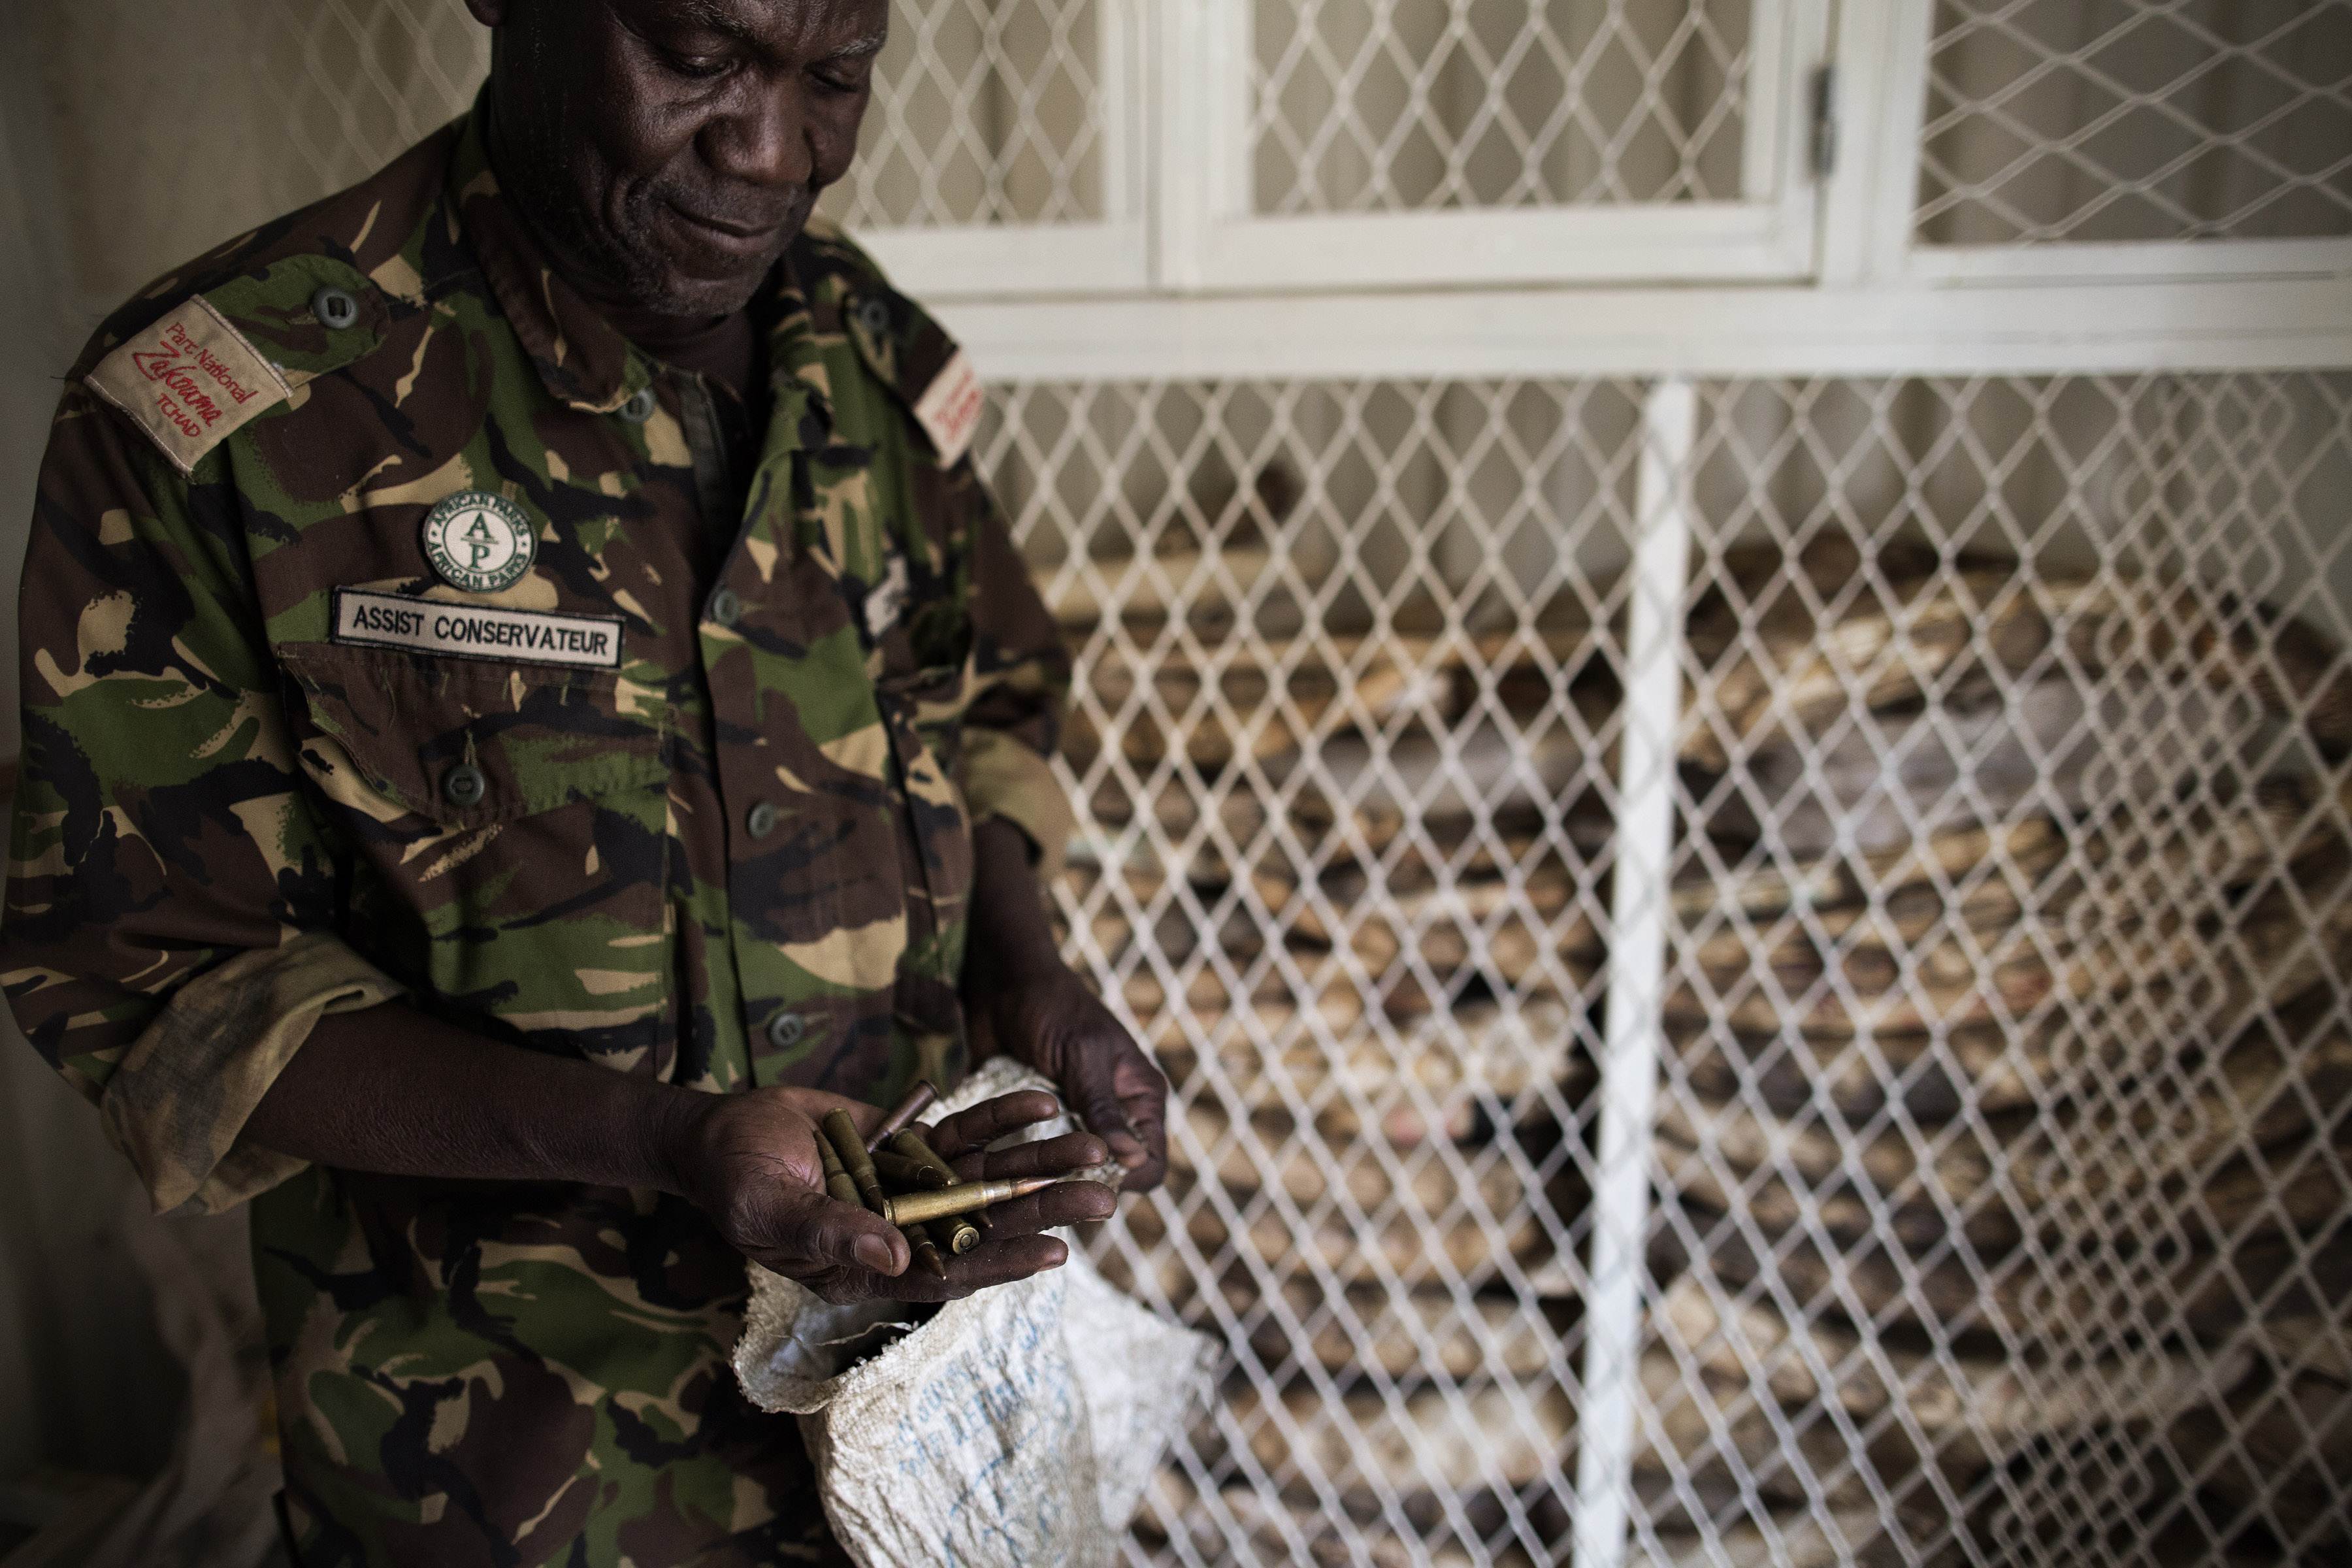 A ranger with the Chadian Zakouma National Park on February 20, 2014 shows ammunition confiscated from poachers in the park at the armoury. Photo: AFP